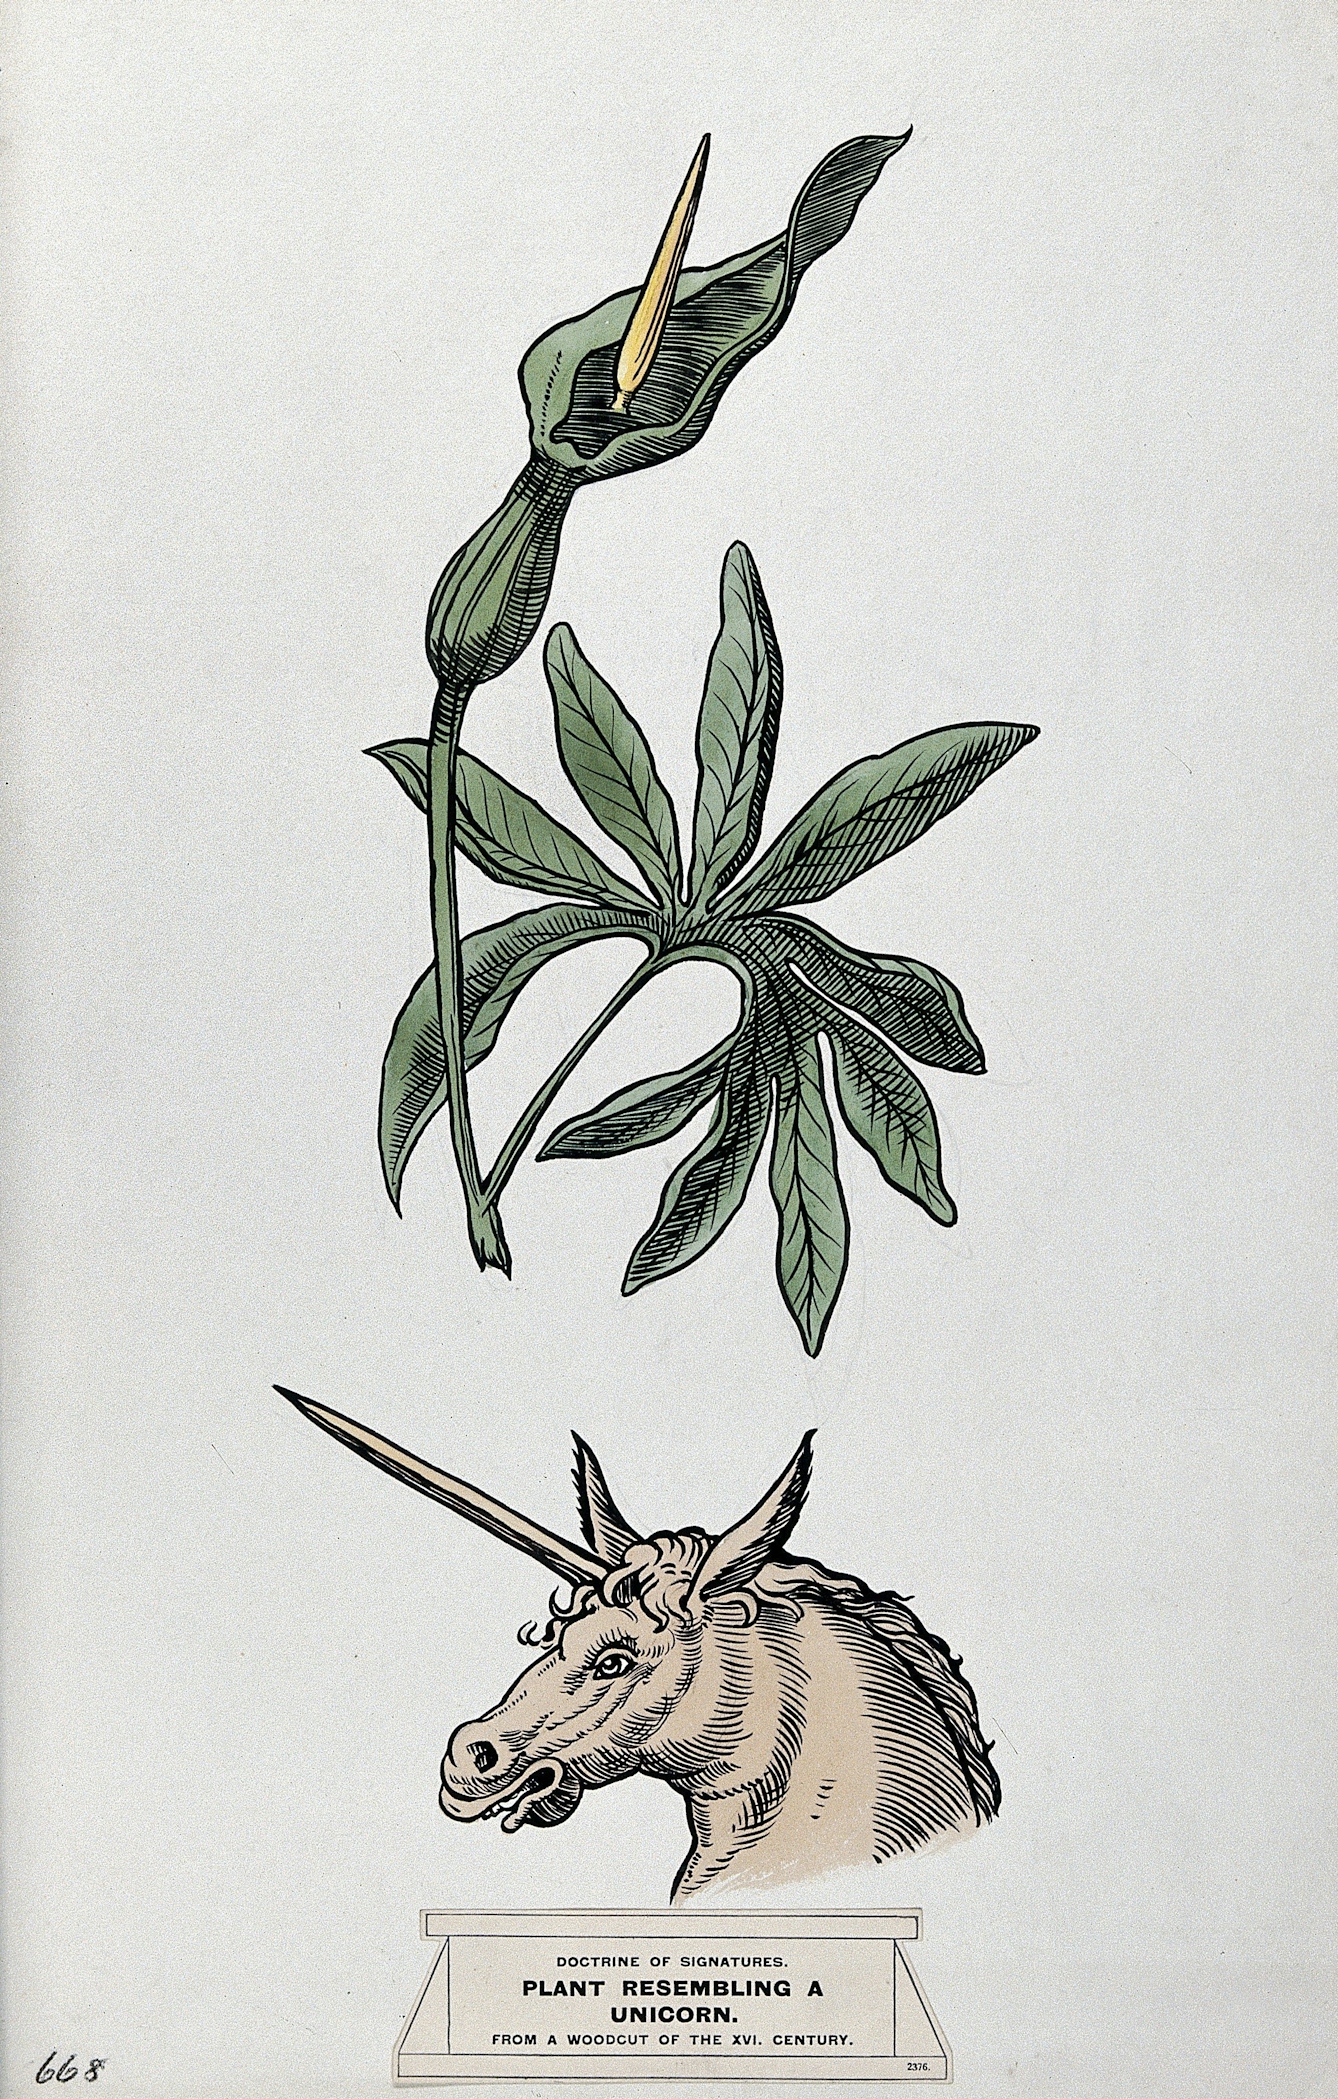 Colour drawing of a plant with seed-pods resembling the horn of a unicorn, above, and a unicorn's head, below. Styled after a sixteenth-century woodcut illustration.